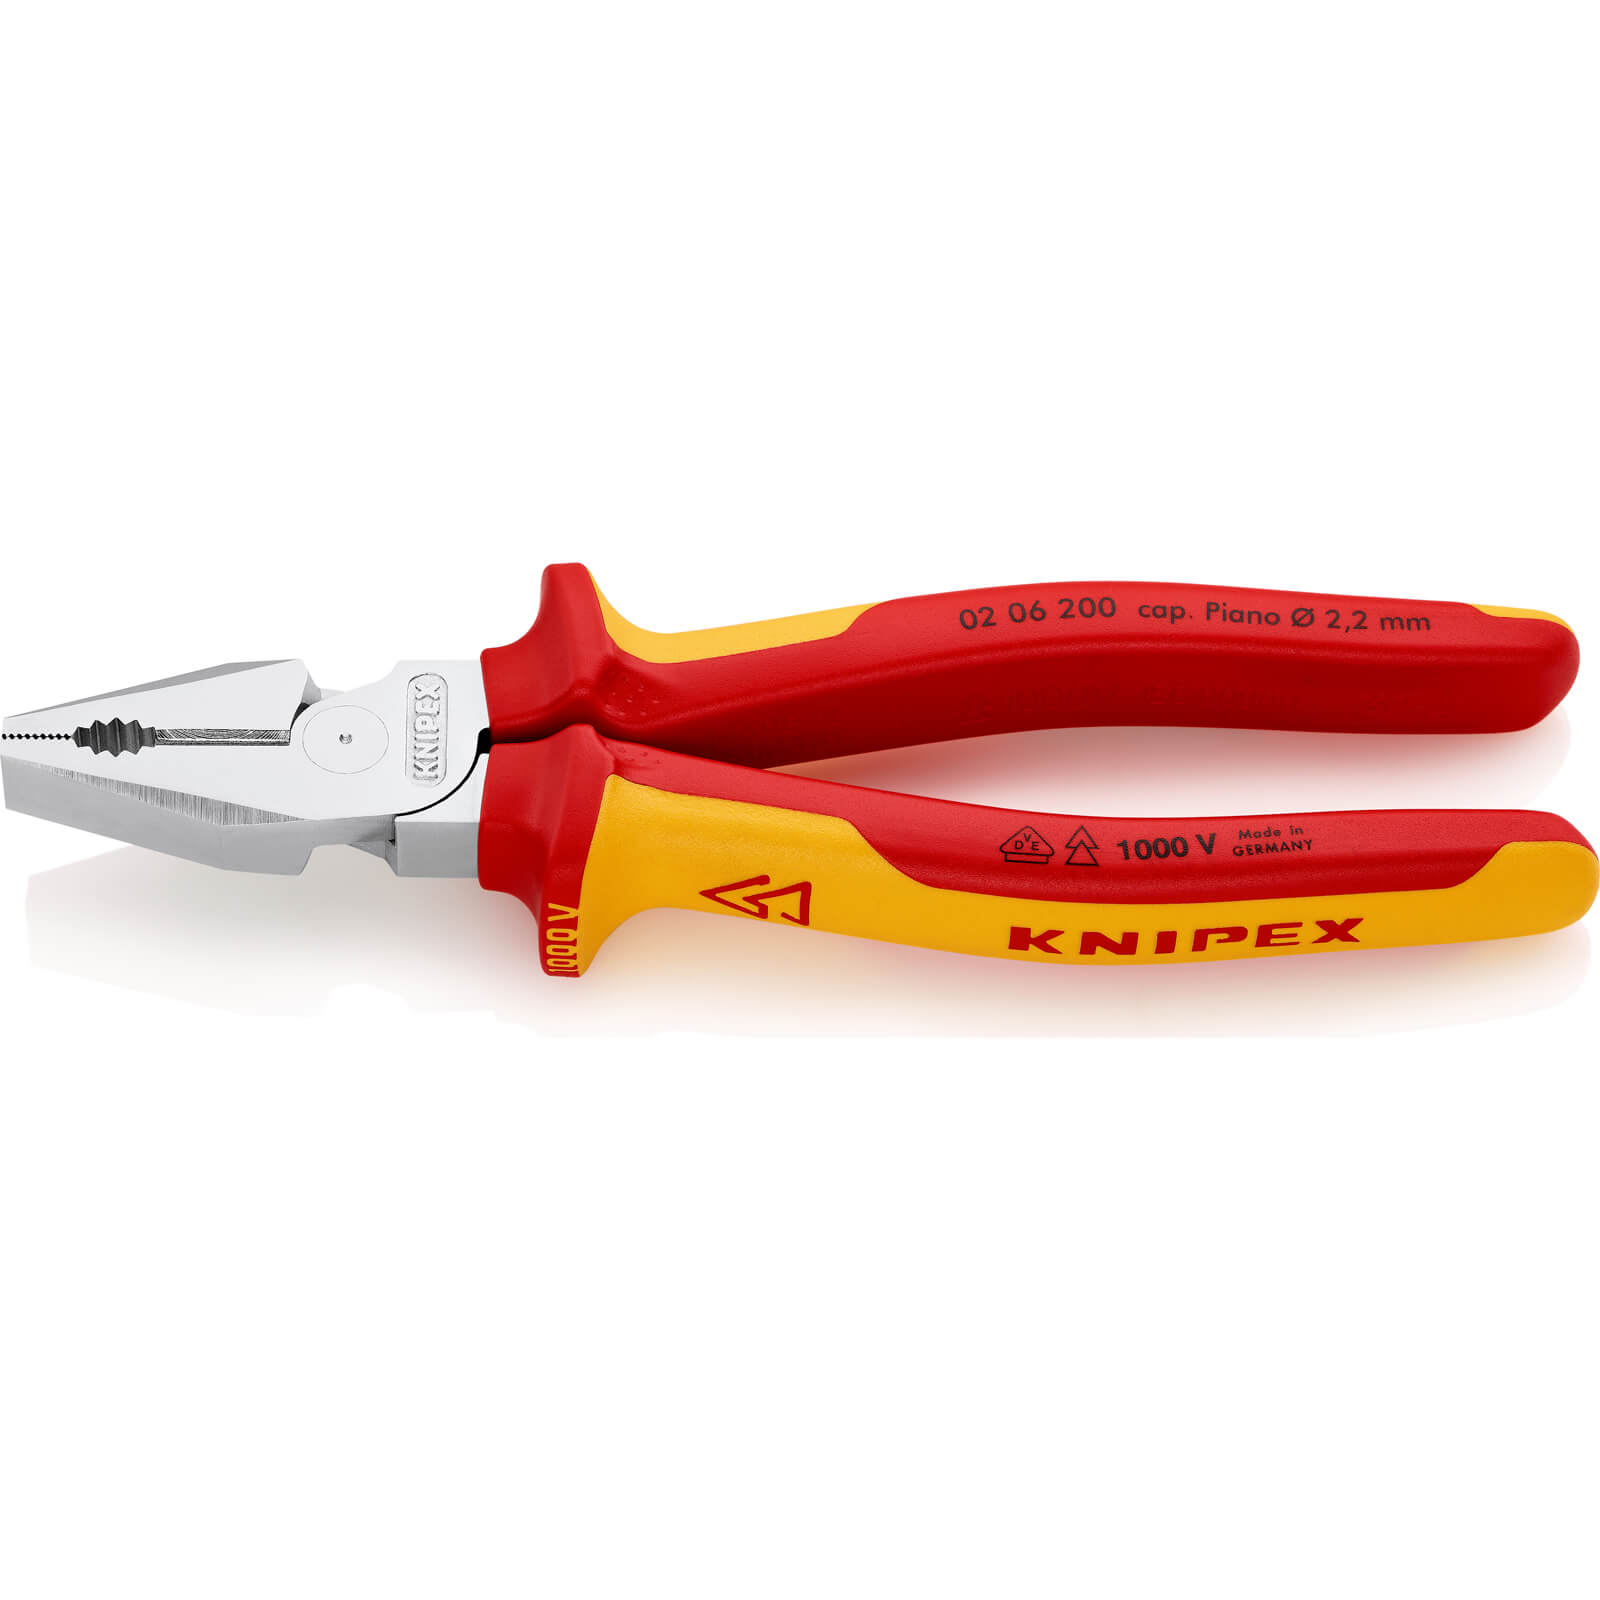 Knipex 02 06 VDE Insulated High Leverage Combination Pliers 200mm